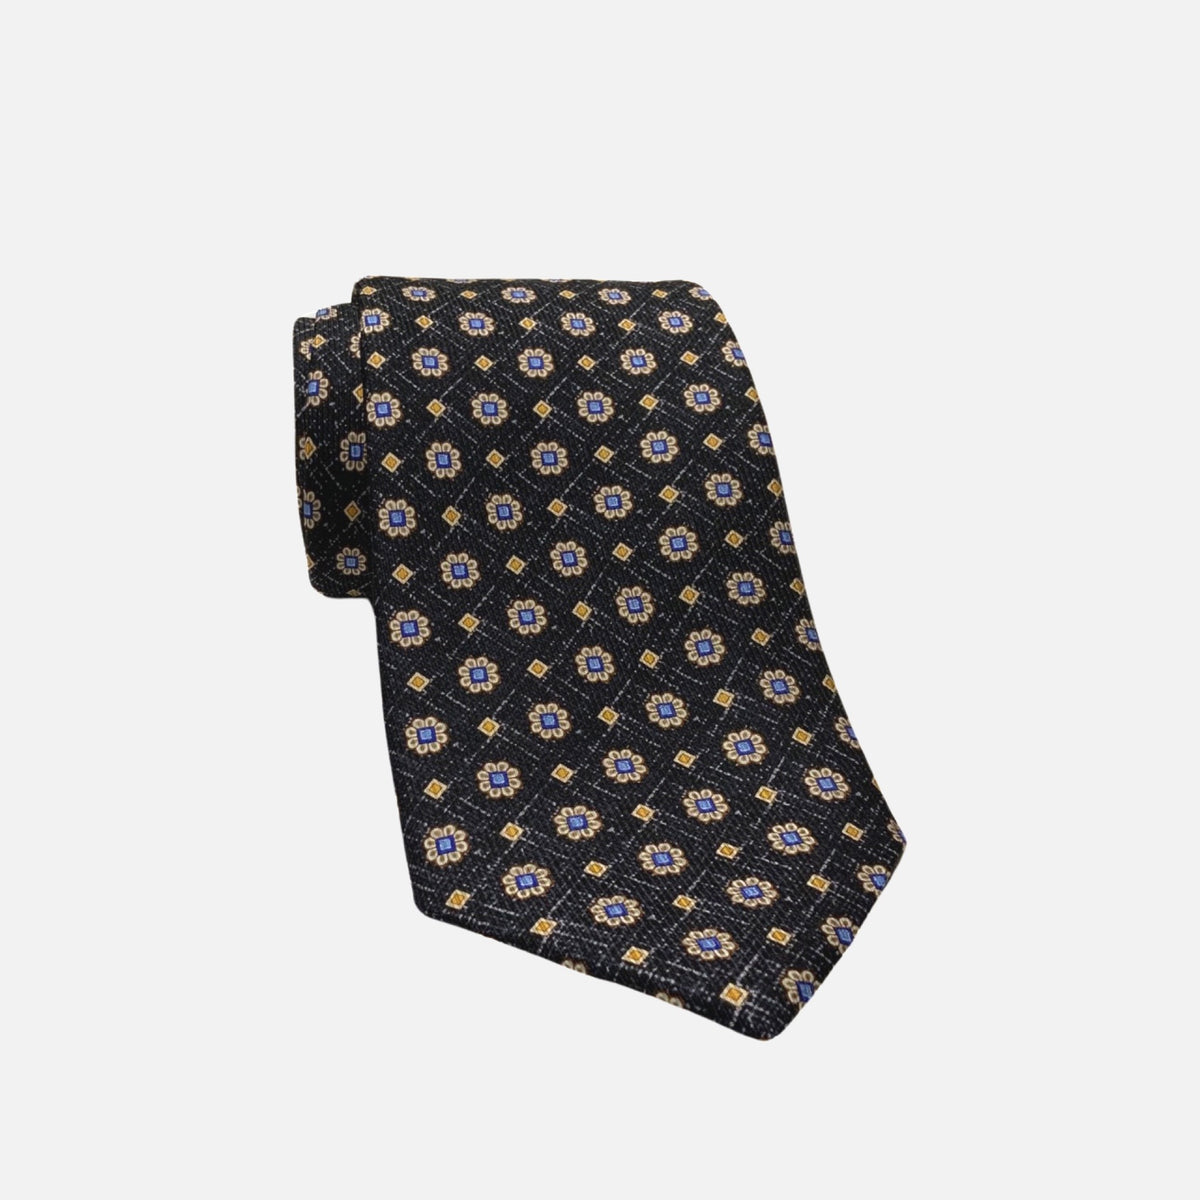 Floral and Diamond pattern tie hand made in USA